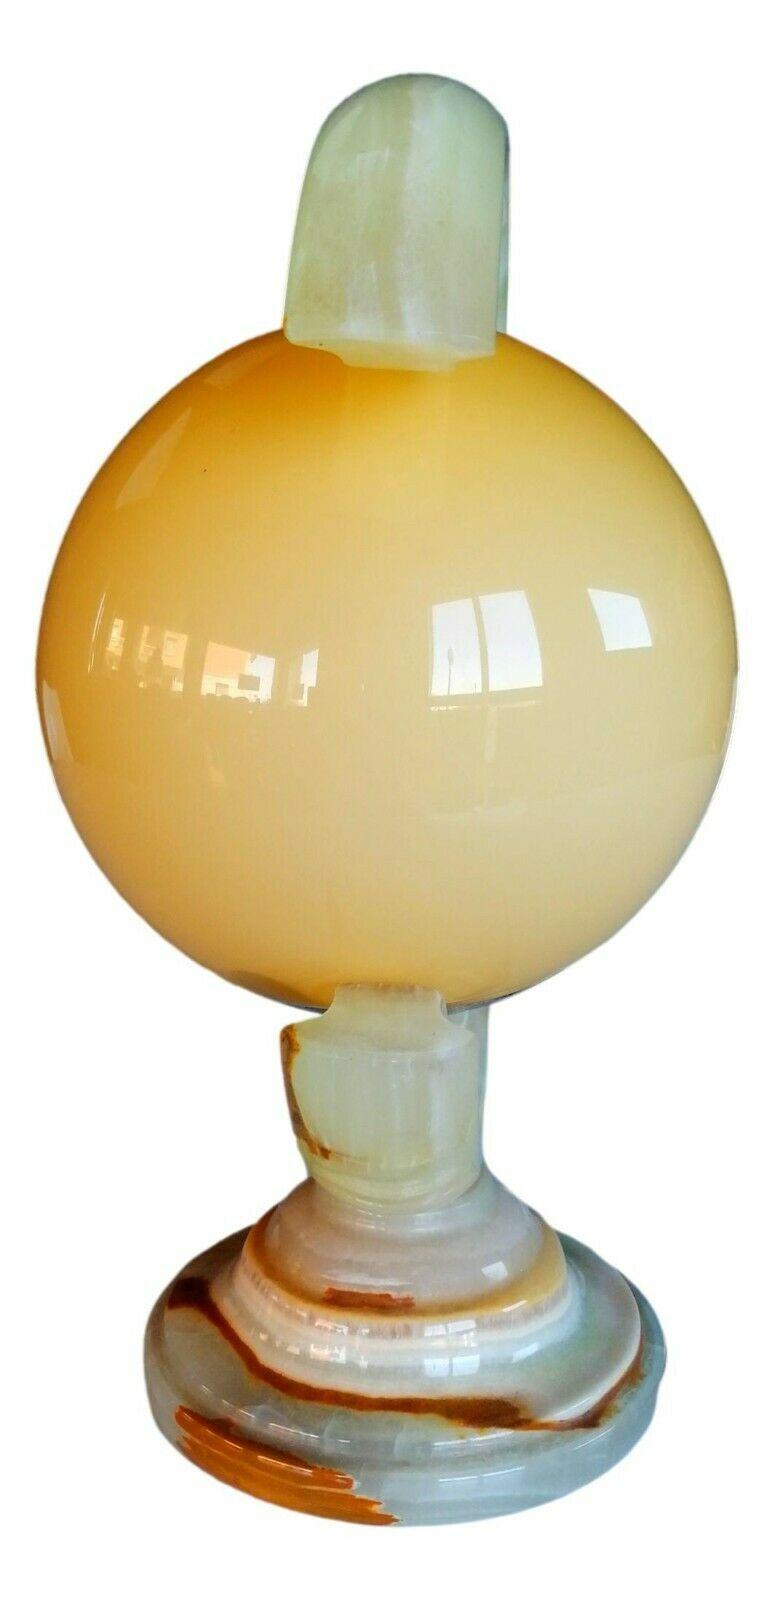 Rare space age era table lamp, early 70s, made of onyx with sand beige opaline glass diffuser

It measures 36 cm in height by 28 cm in width, in excellent storage conditions, fully functional

for safety reasons it will be shipped disassembled,